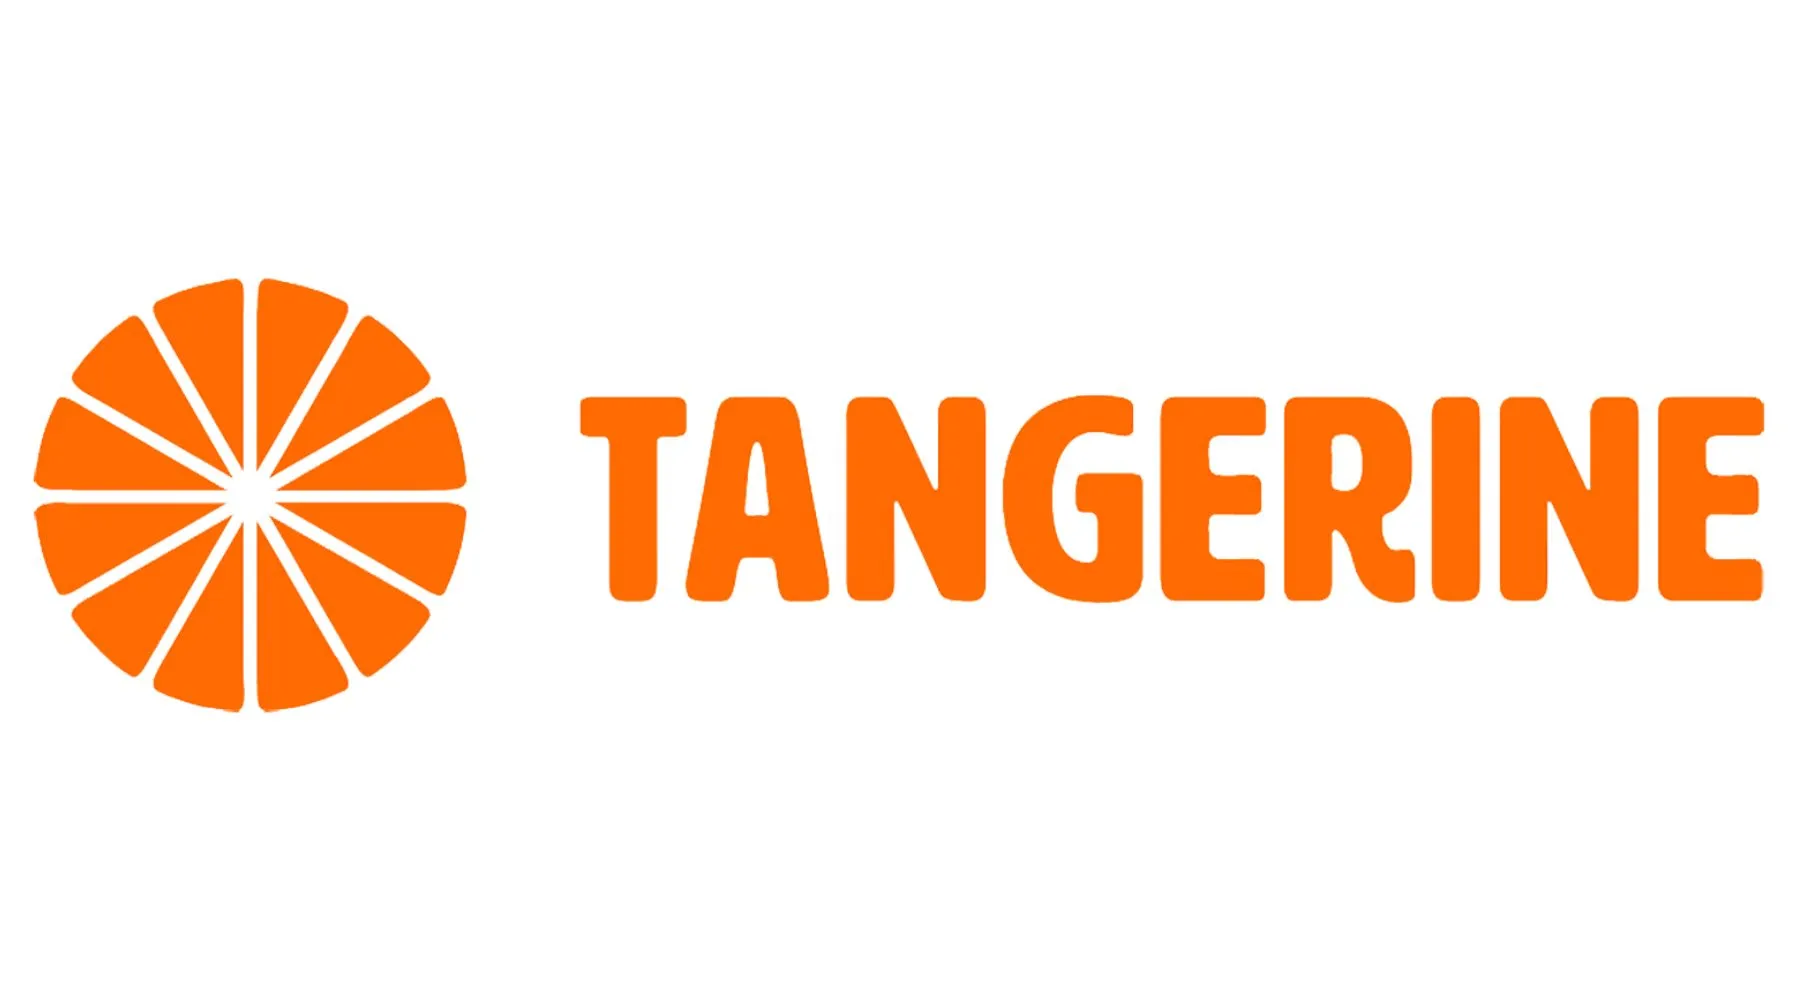 Tangerine Internet Review: Is It The Best Option For You?